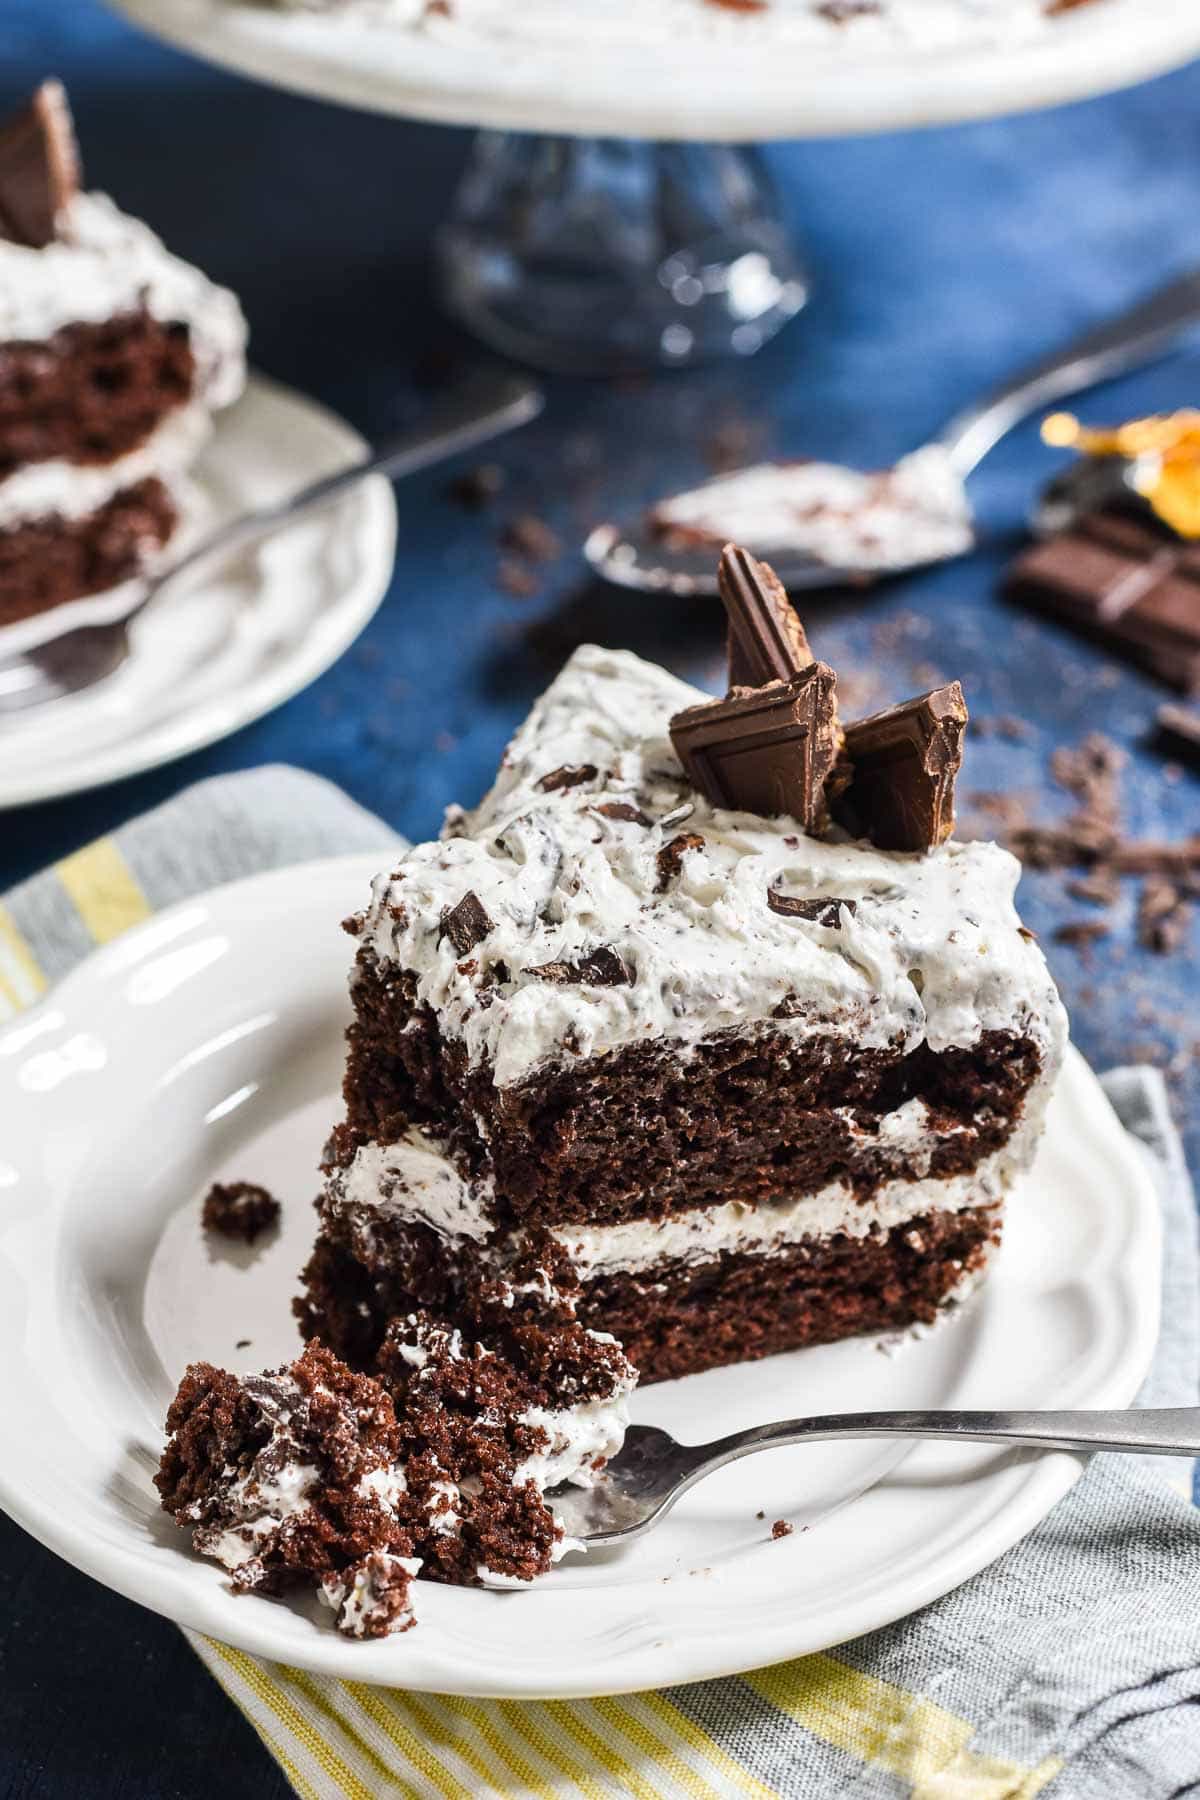 Chocolate Candy Bar Cake is the perfect way to use up leftover Halloween candy. Use any of your favorite candy bars for a special treat.